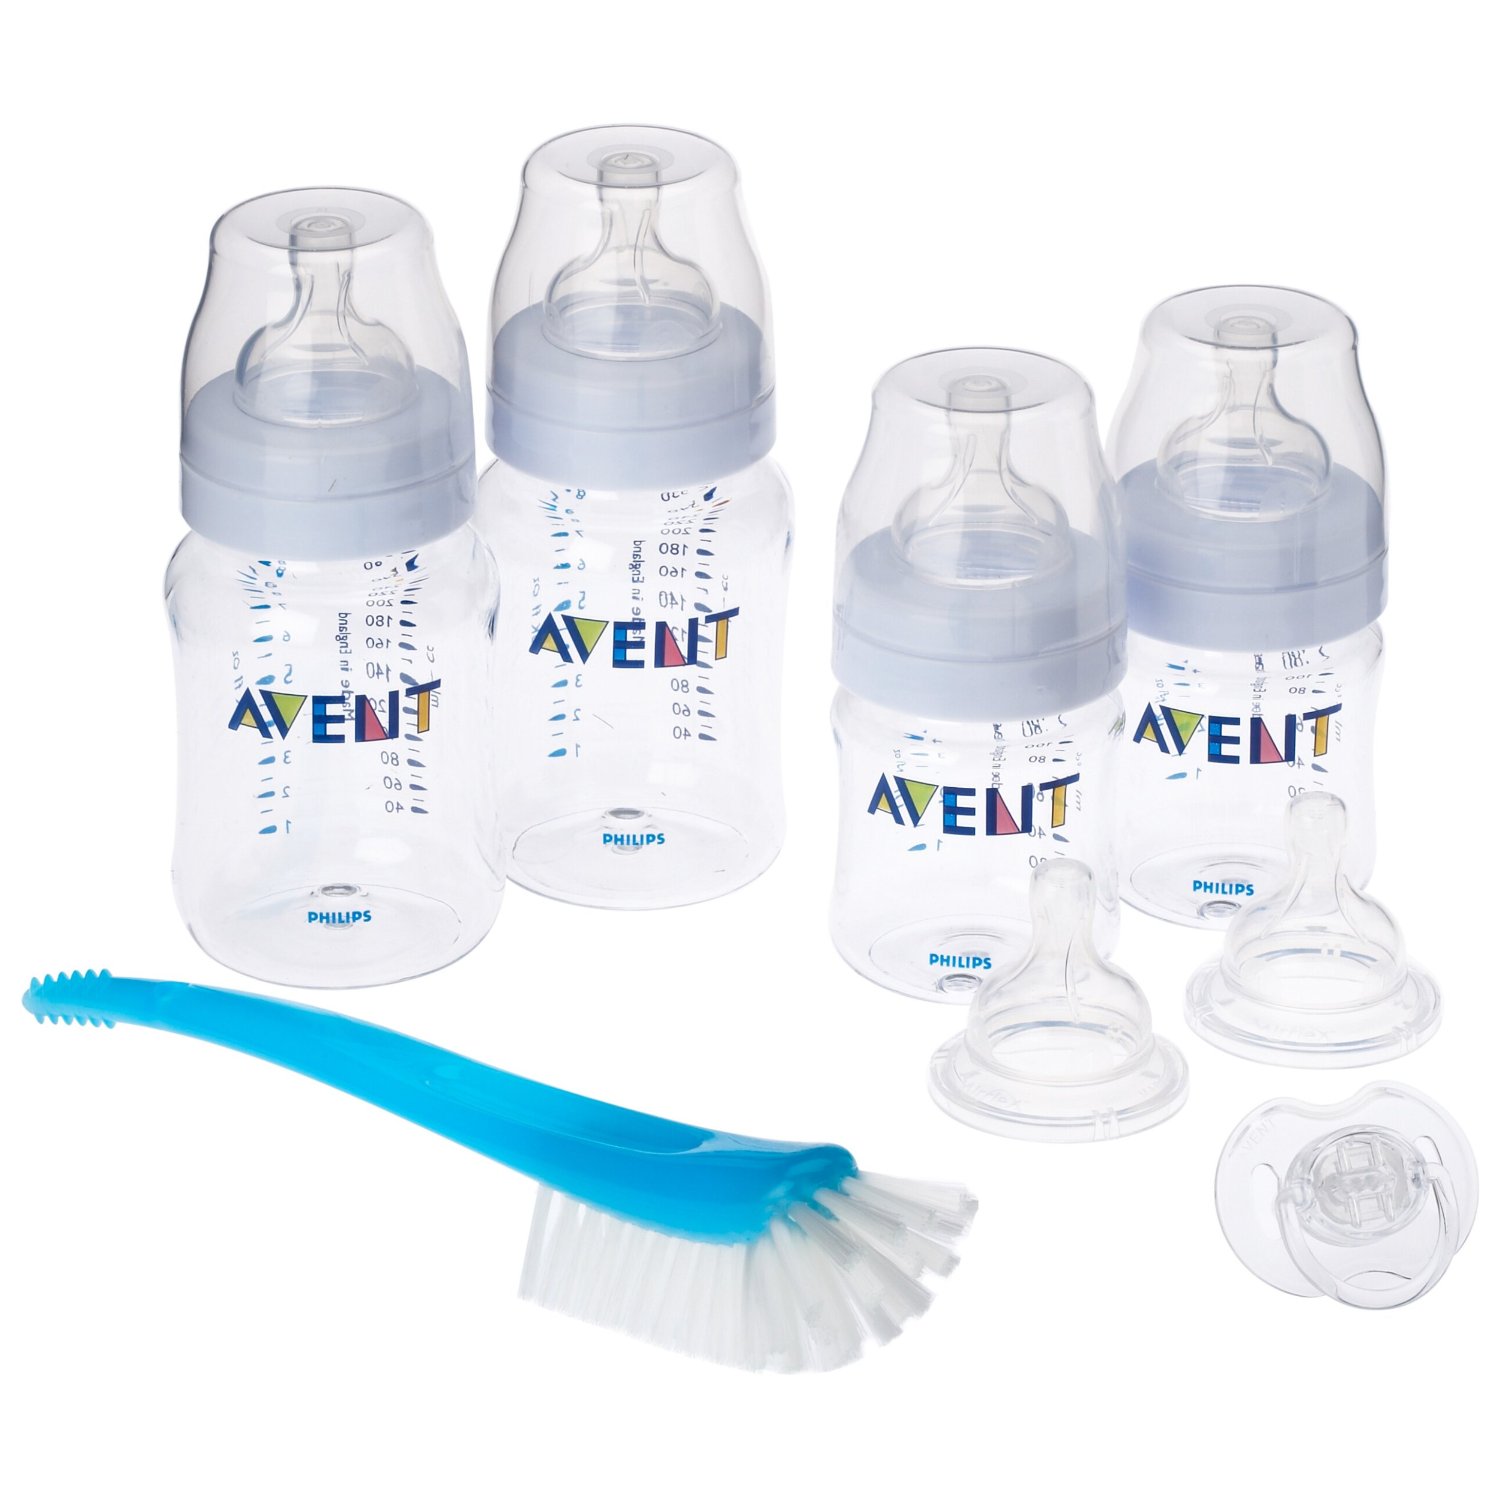 Baby&Mama: Avent Baby Bottles - Package and Set